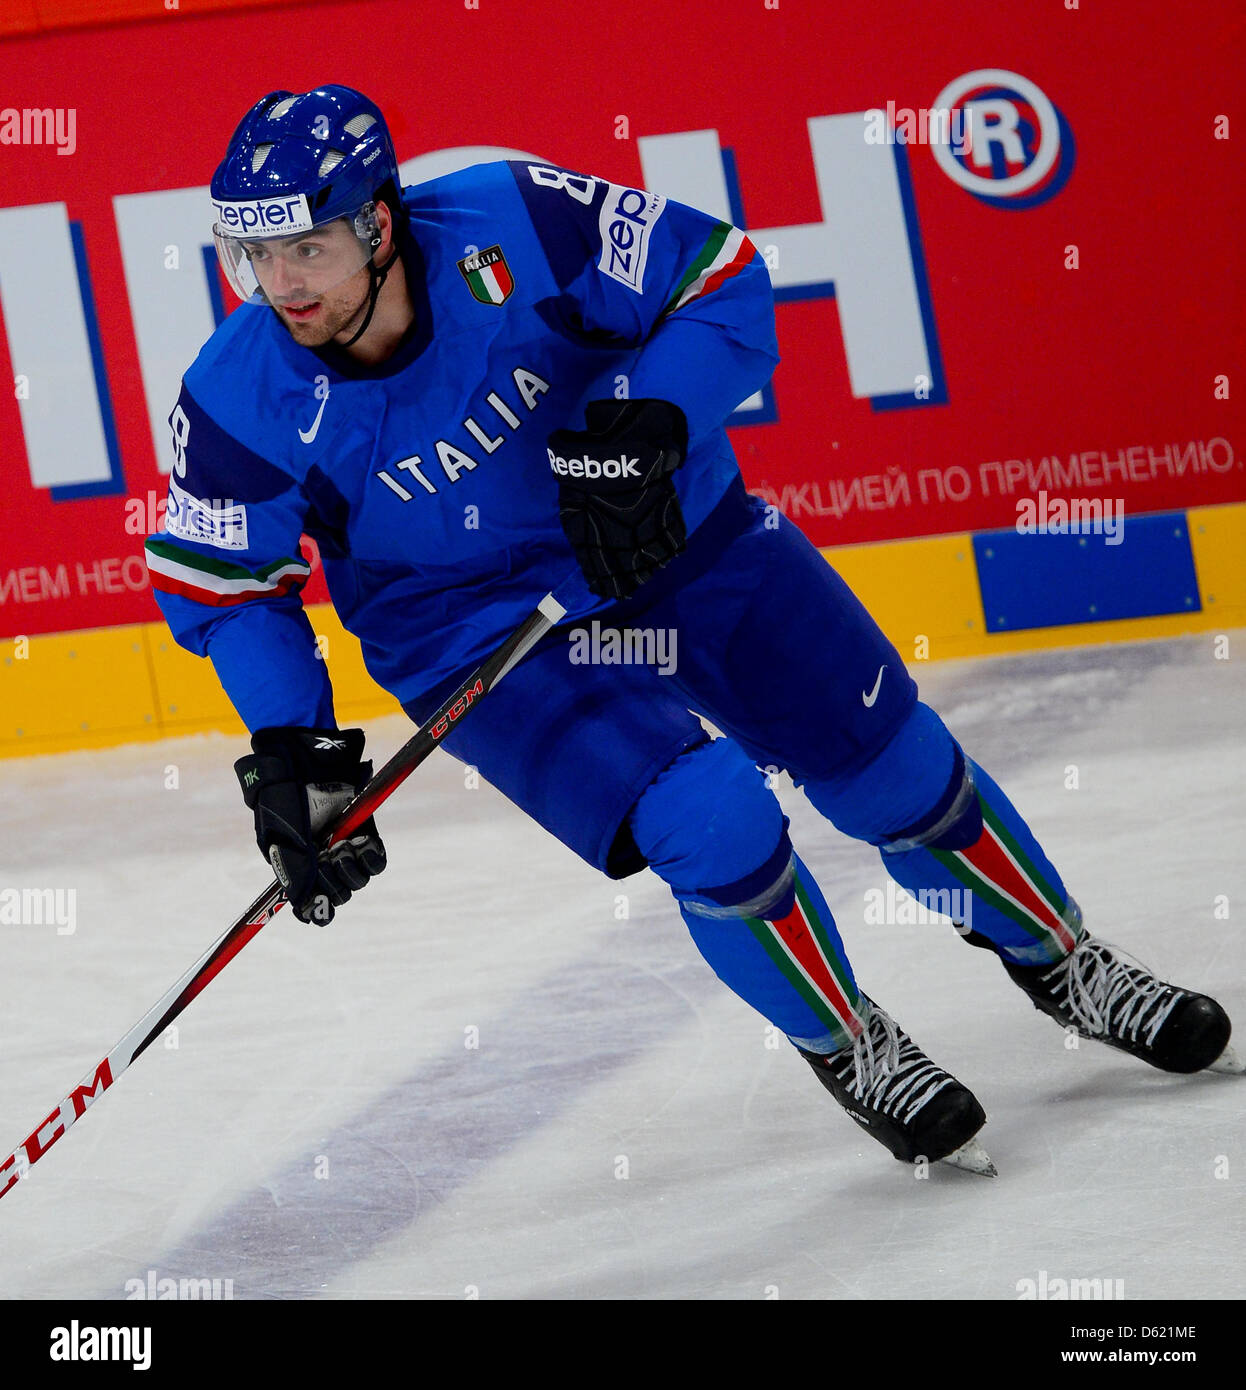 Italy's Vincent Rocco in action during the Ice Hockey World Championships  preliminary round match between Latvia